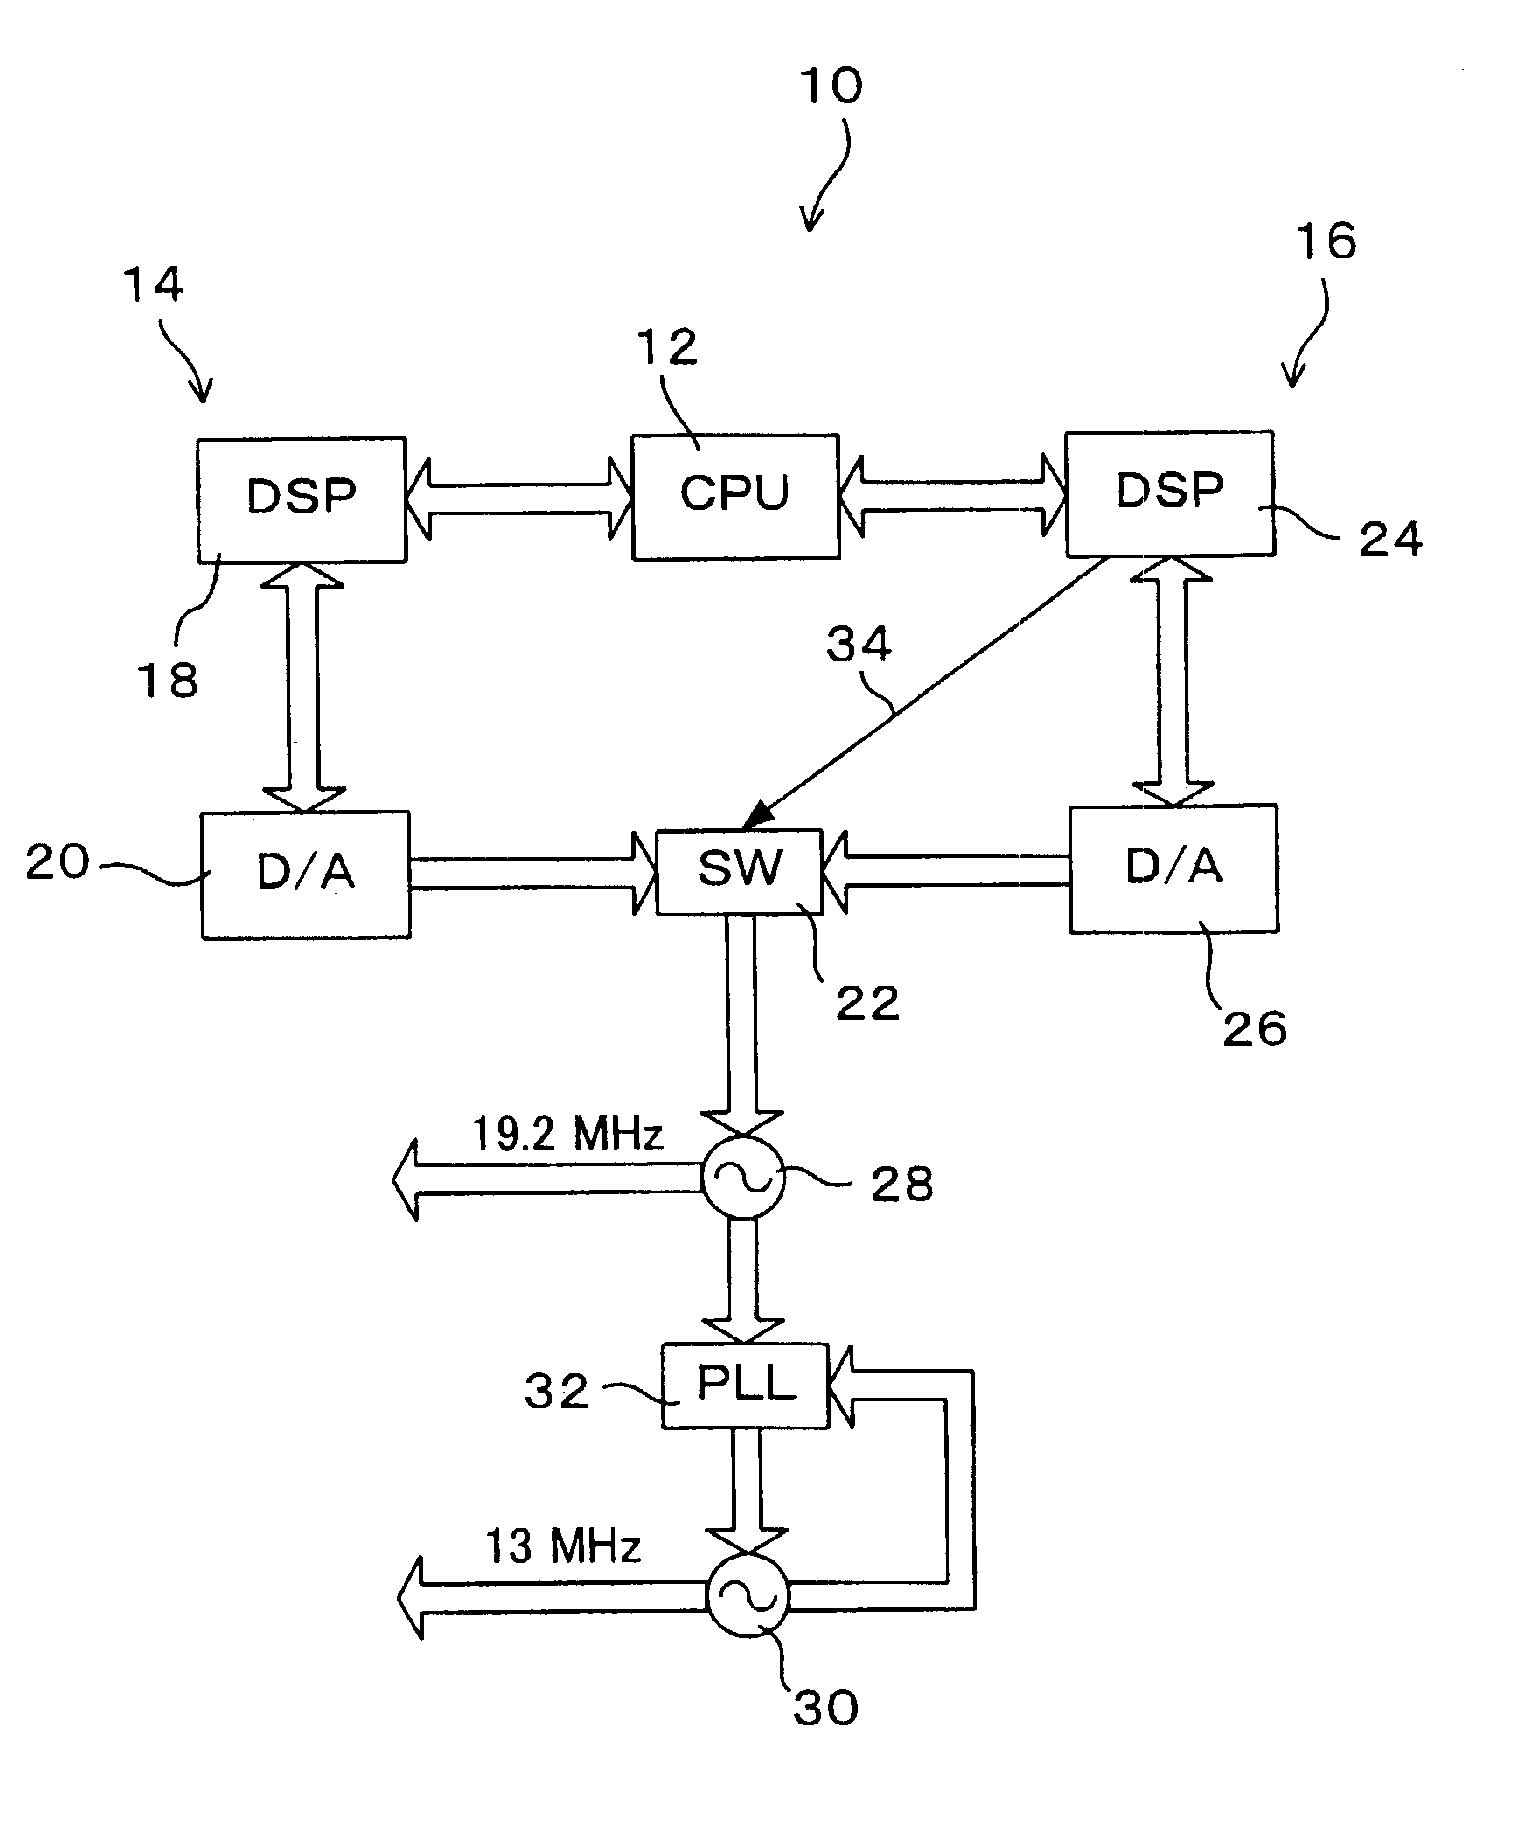 Mobile radio communications device having a PLL that phase locks with two crystal oscillators